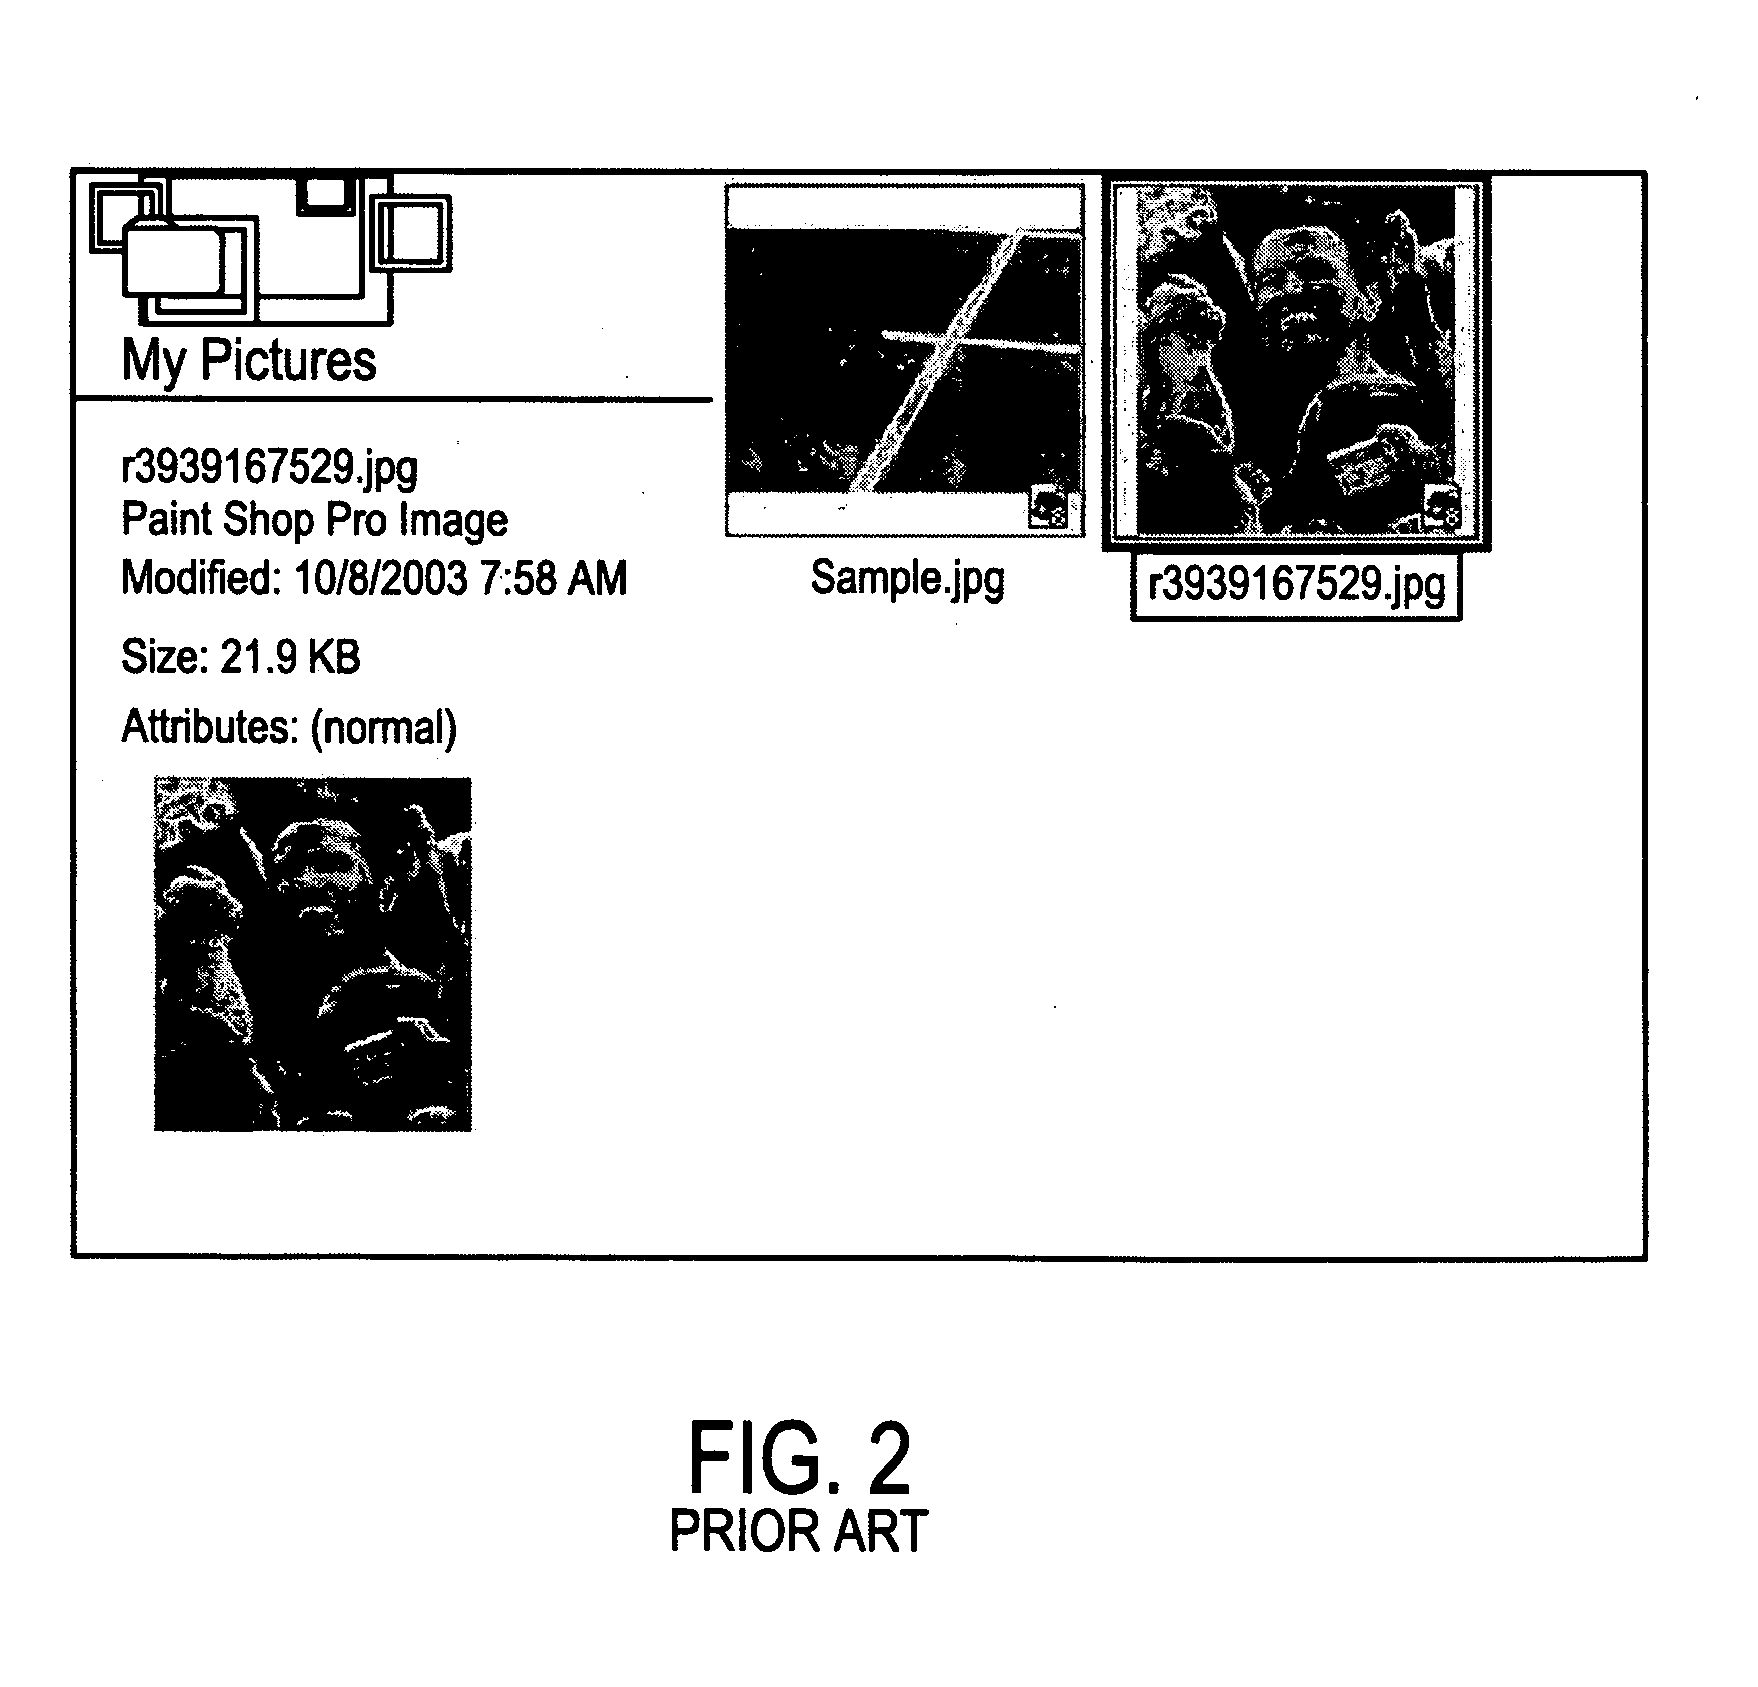 Graphical user interface for 3-dimensional view of a data collection based on an attribute of the data